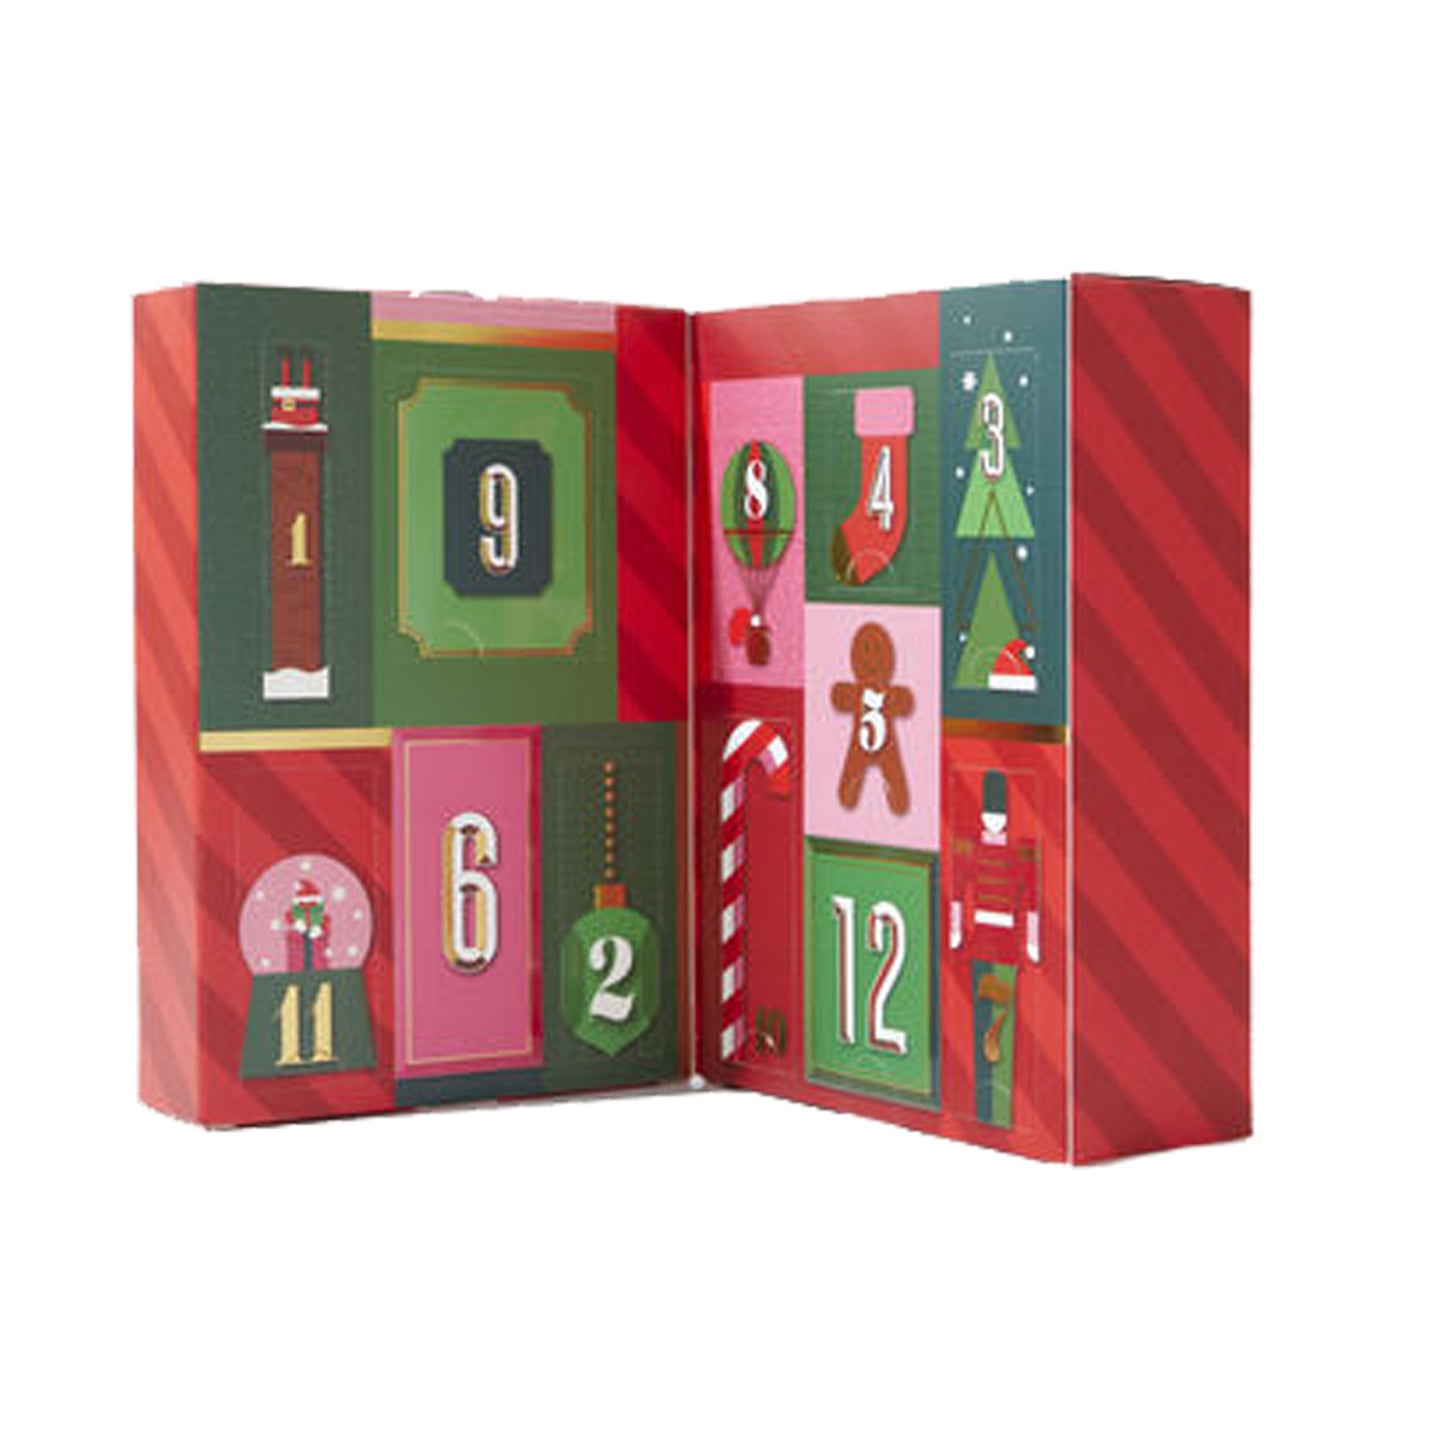 Bath & Body Works’ Christmas Advent Calendar Is Packed With 12 Days of